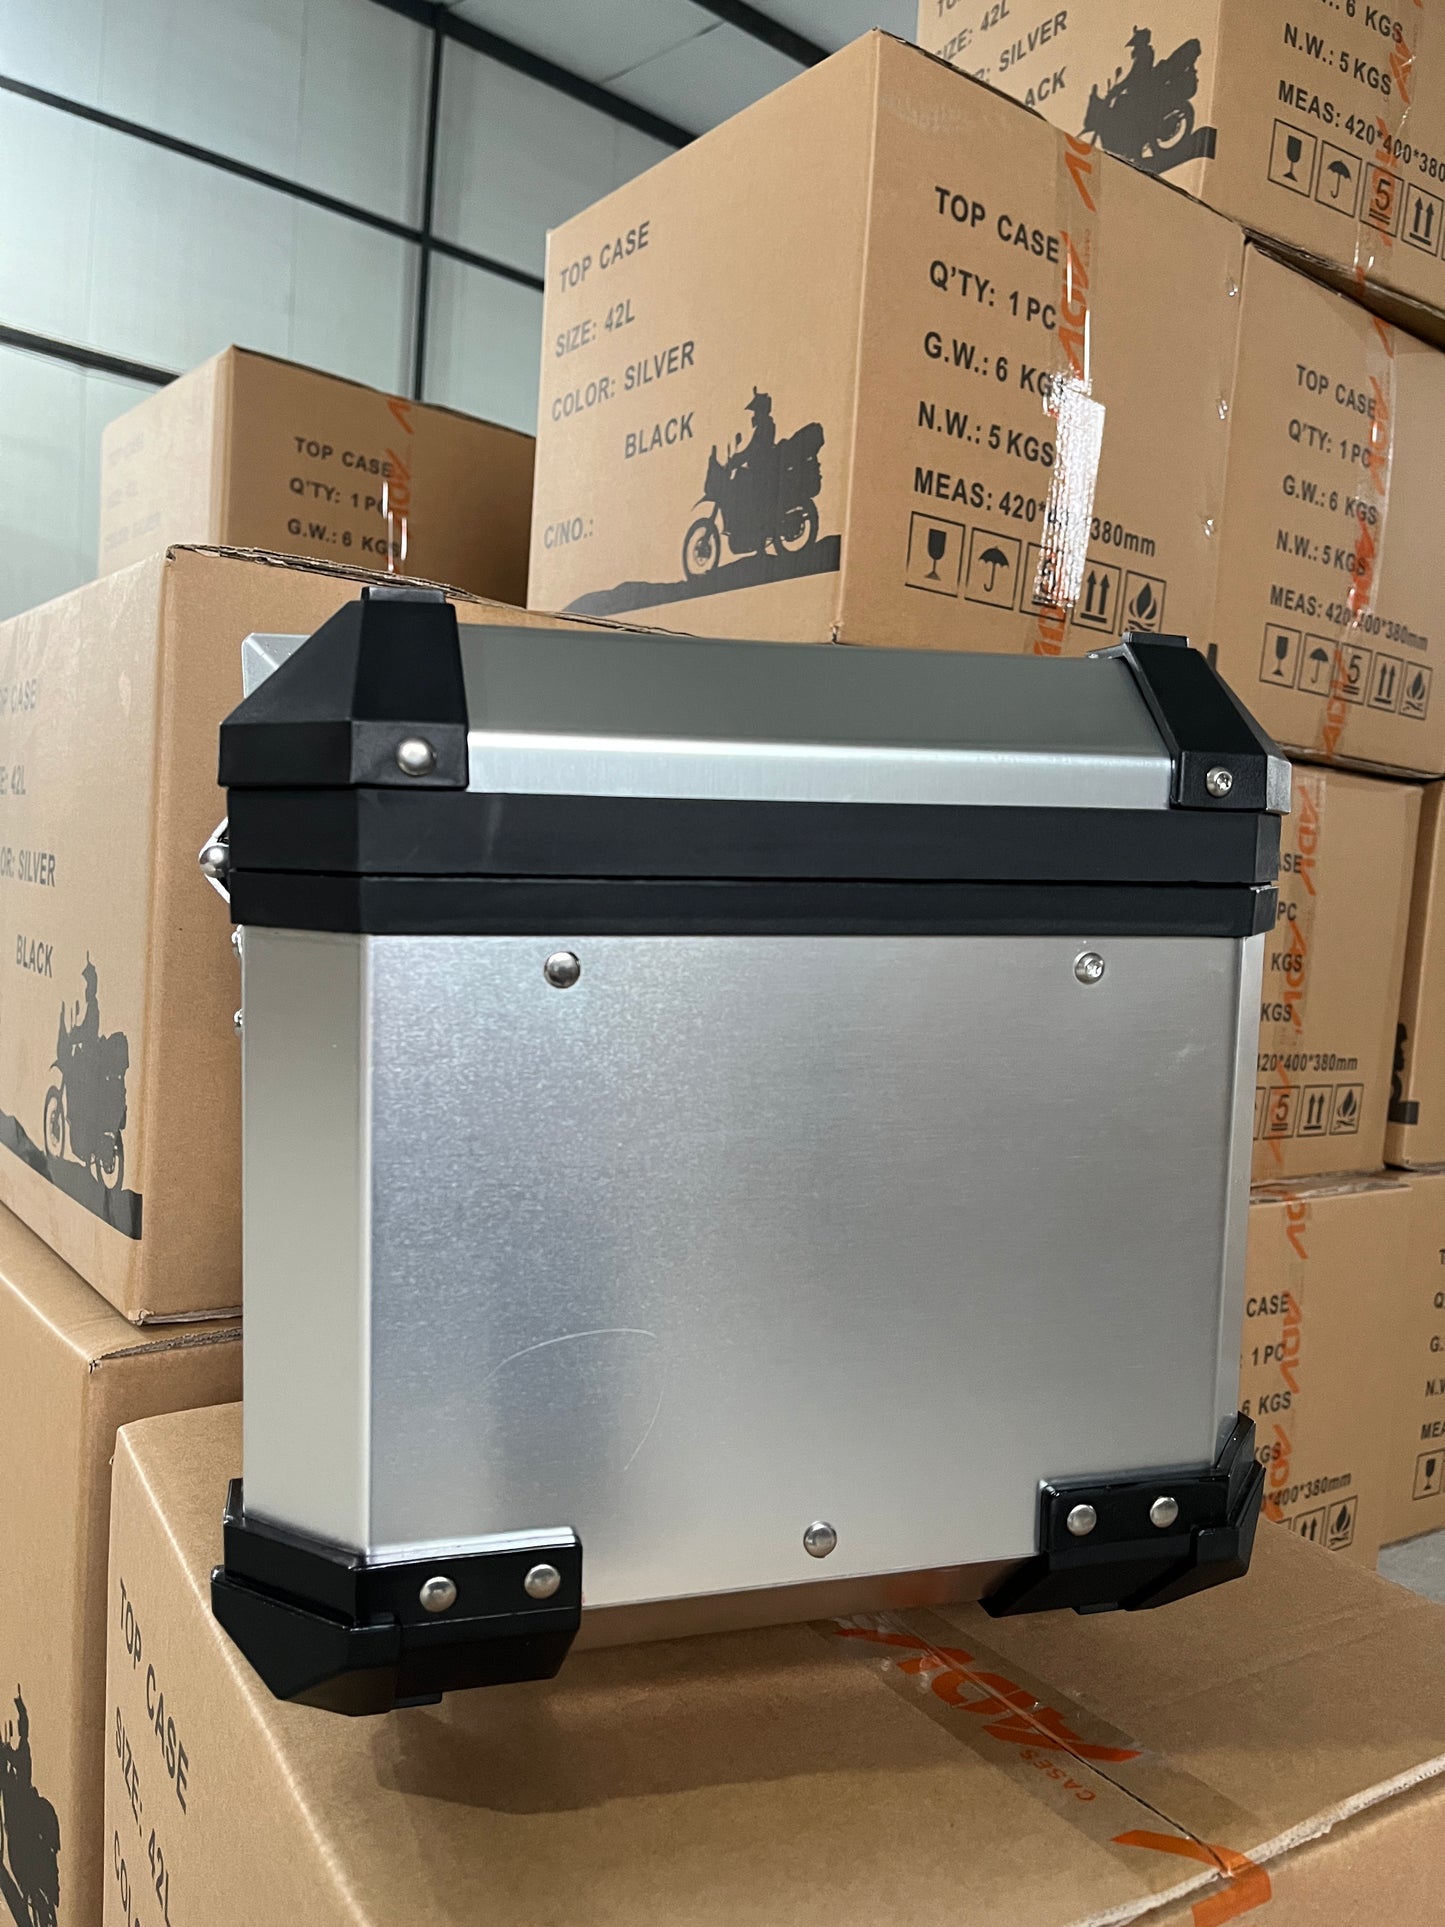 DS650 Aluminum alloy box （Slightly flawed）